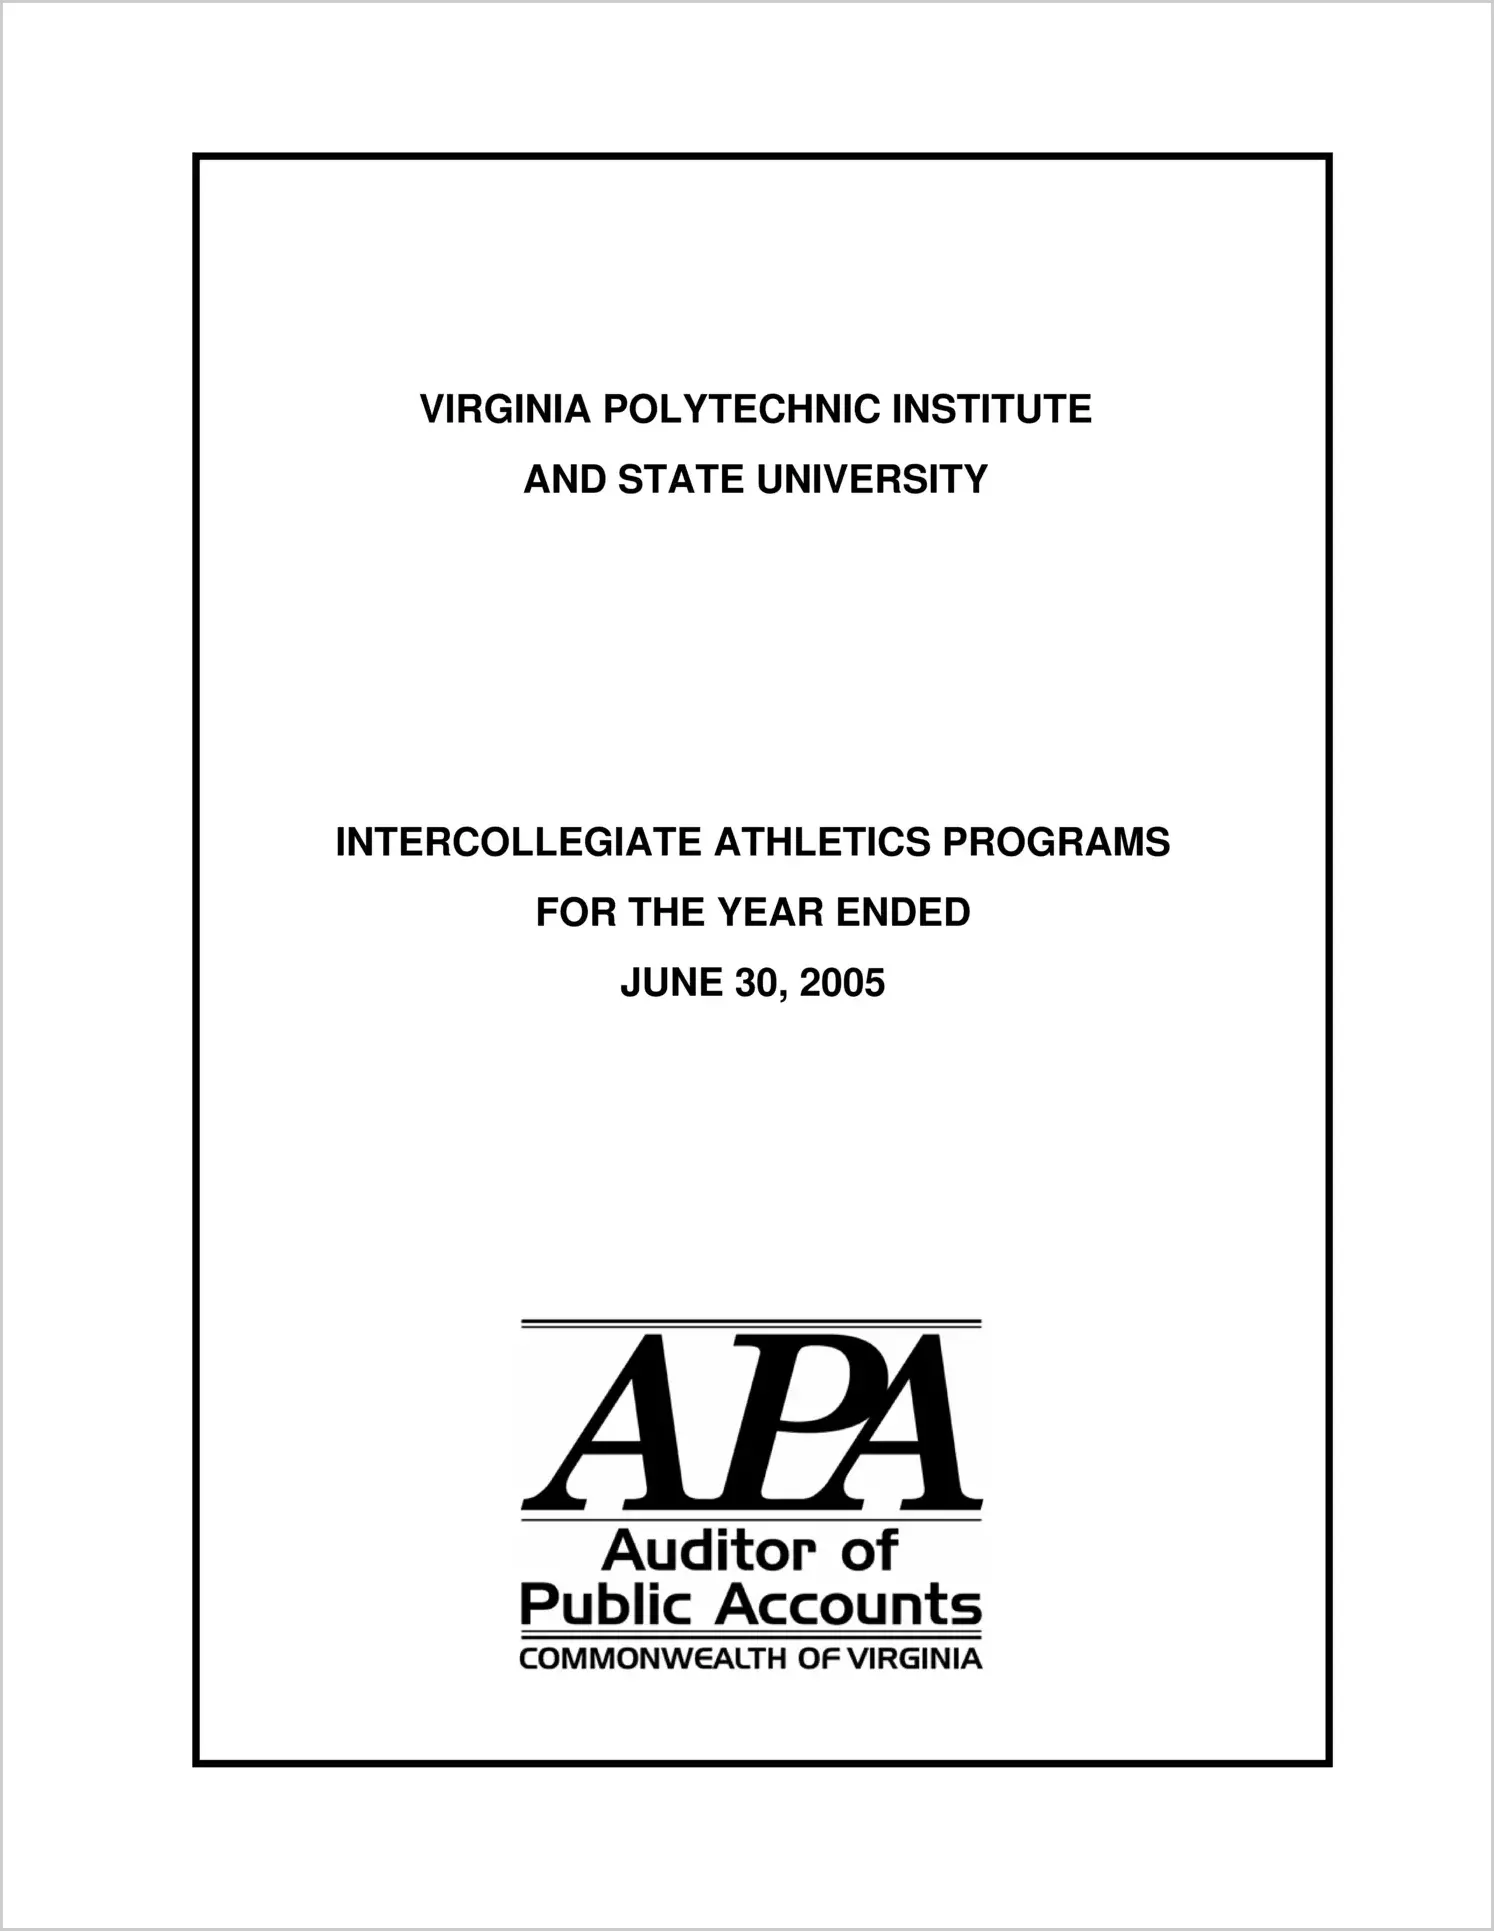 Virginia Polytechnic Institute and State University Intercollegiate Athletic Programs for the year ended June 30, 2005